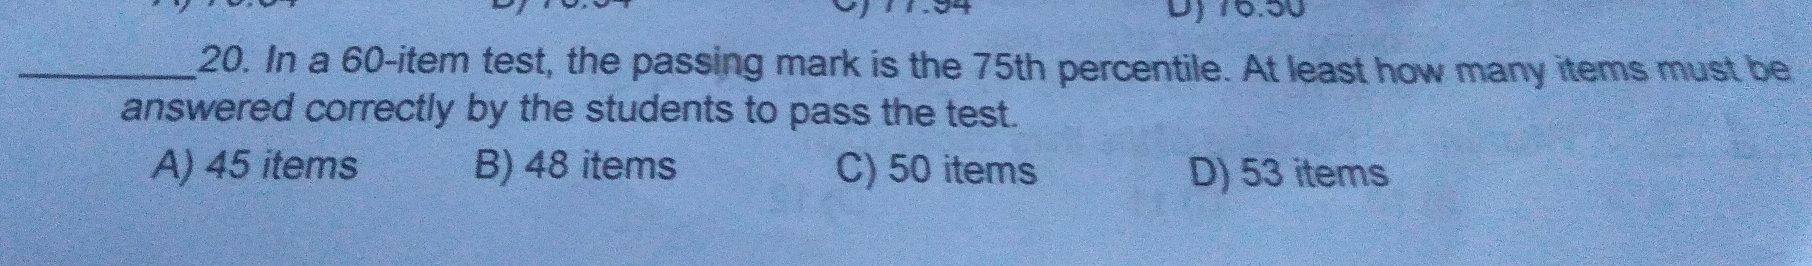 20. In a 60-item test, the passing mark is the 75th percentile. At least how many items must be answered correctly by the students to pass the test. A 45 items B 48 items C 50 items D 53 items